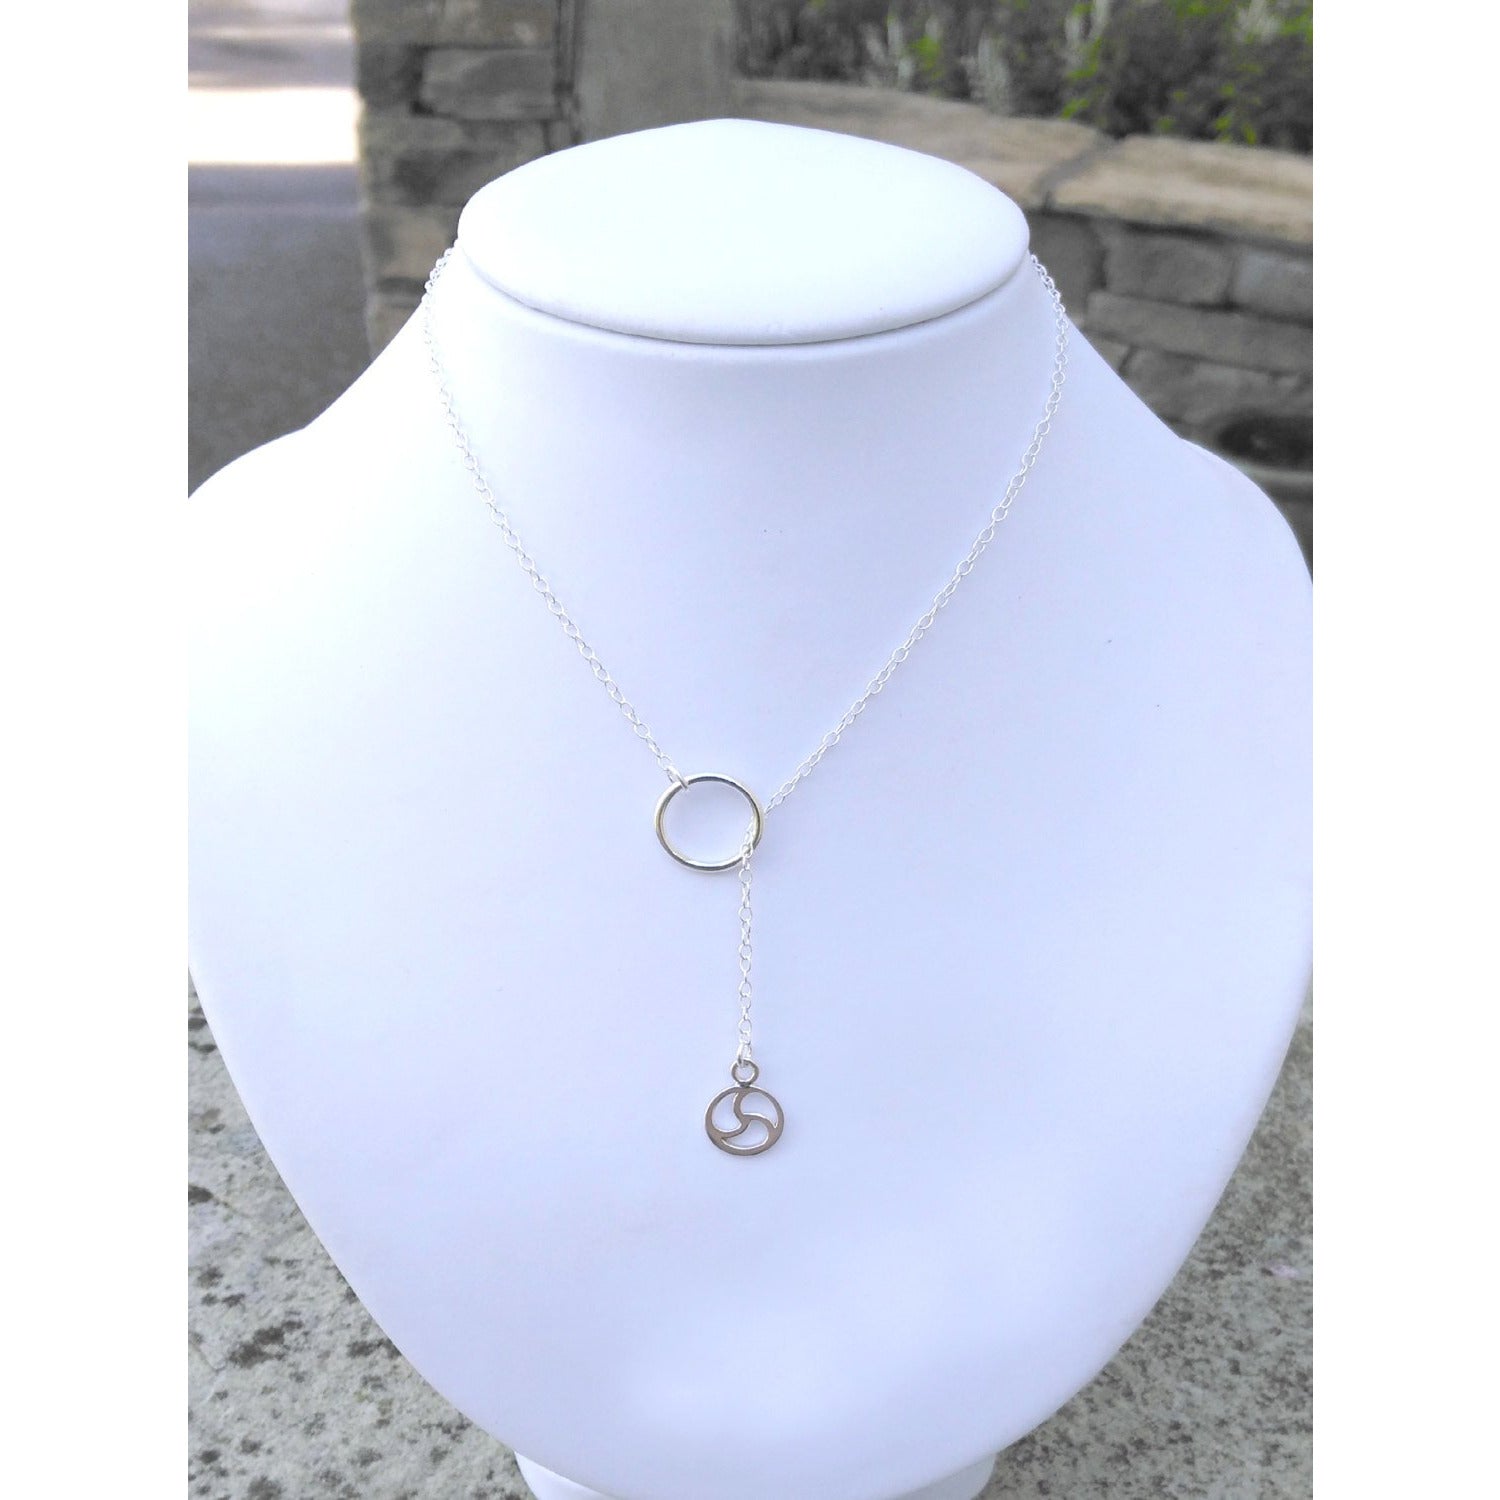 Lariat  Sterling Silver,Discreet Day Collar , Necklace,  Silver O Ring, Unisex,BDSM Triskele